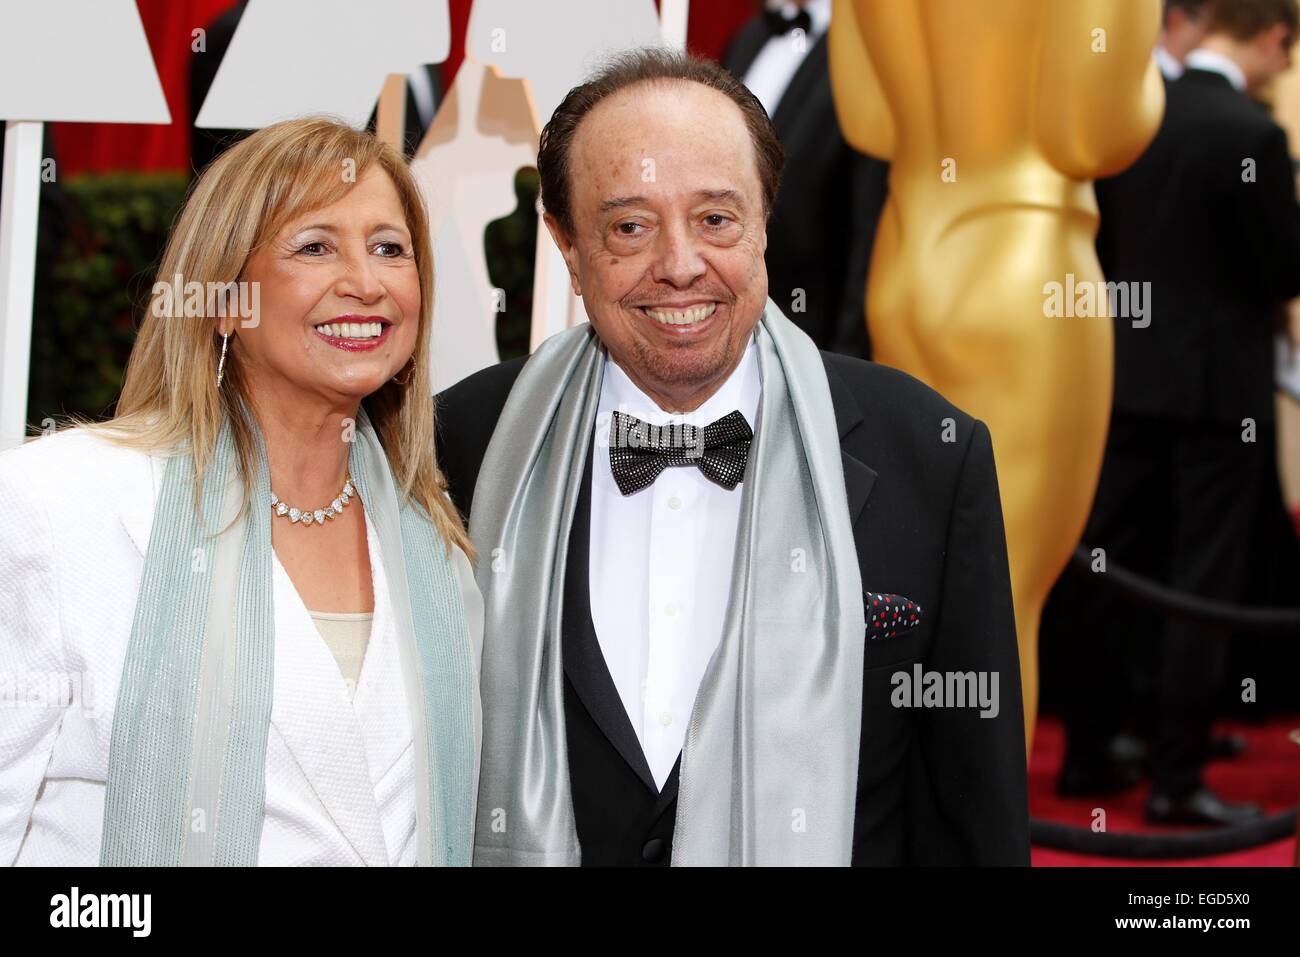 Musician Sergio Mendez and singer Gracinha Leporace attend the 87th Academy Awards, Oscars, at Dolby Theatre in Los Angeles, USA, on 22 February 2015. Photo: Hubert Boesl/dpa - NO WIRE SERVICE - © dpa picture alliance/Alamy Live News Credit:  dpa picture alliance/Alamy Live News Stock Photo